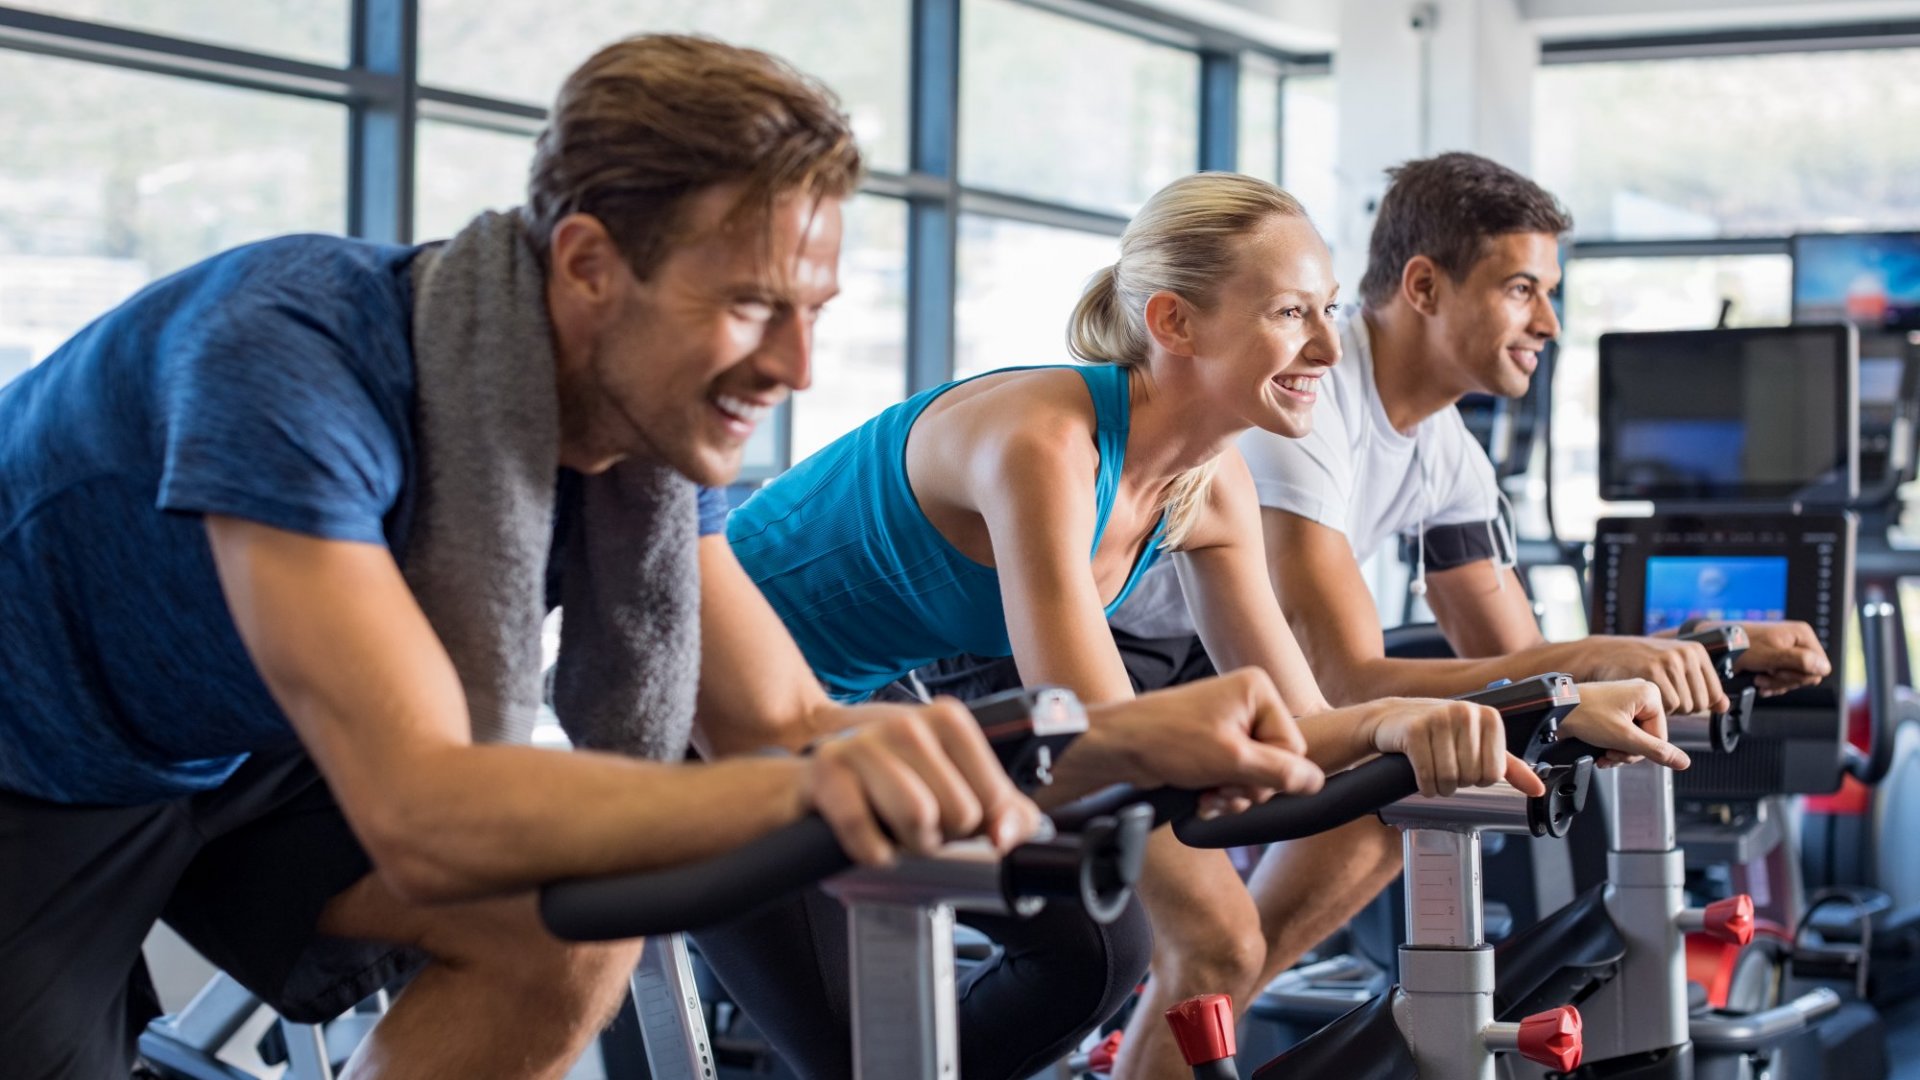 Health advice: 10 things to keep in mind before joining a gym